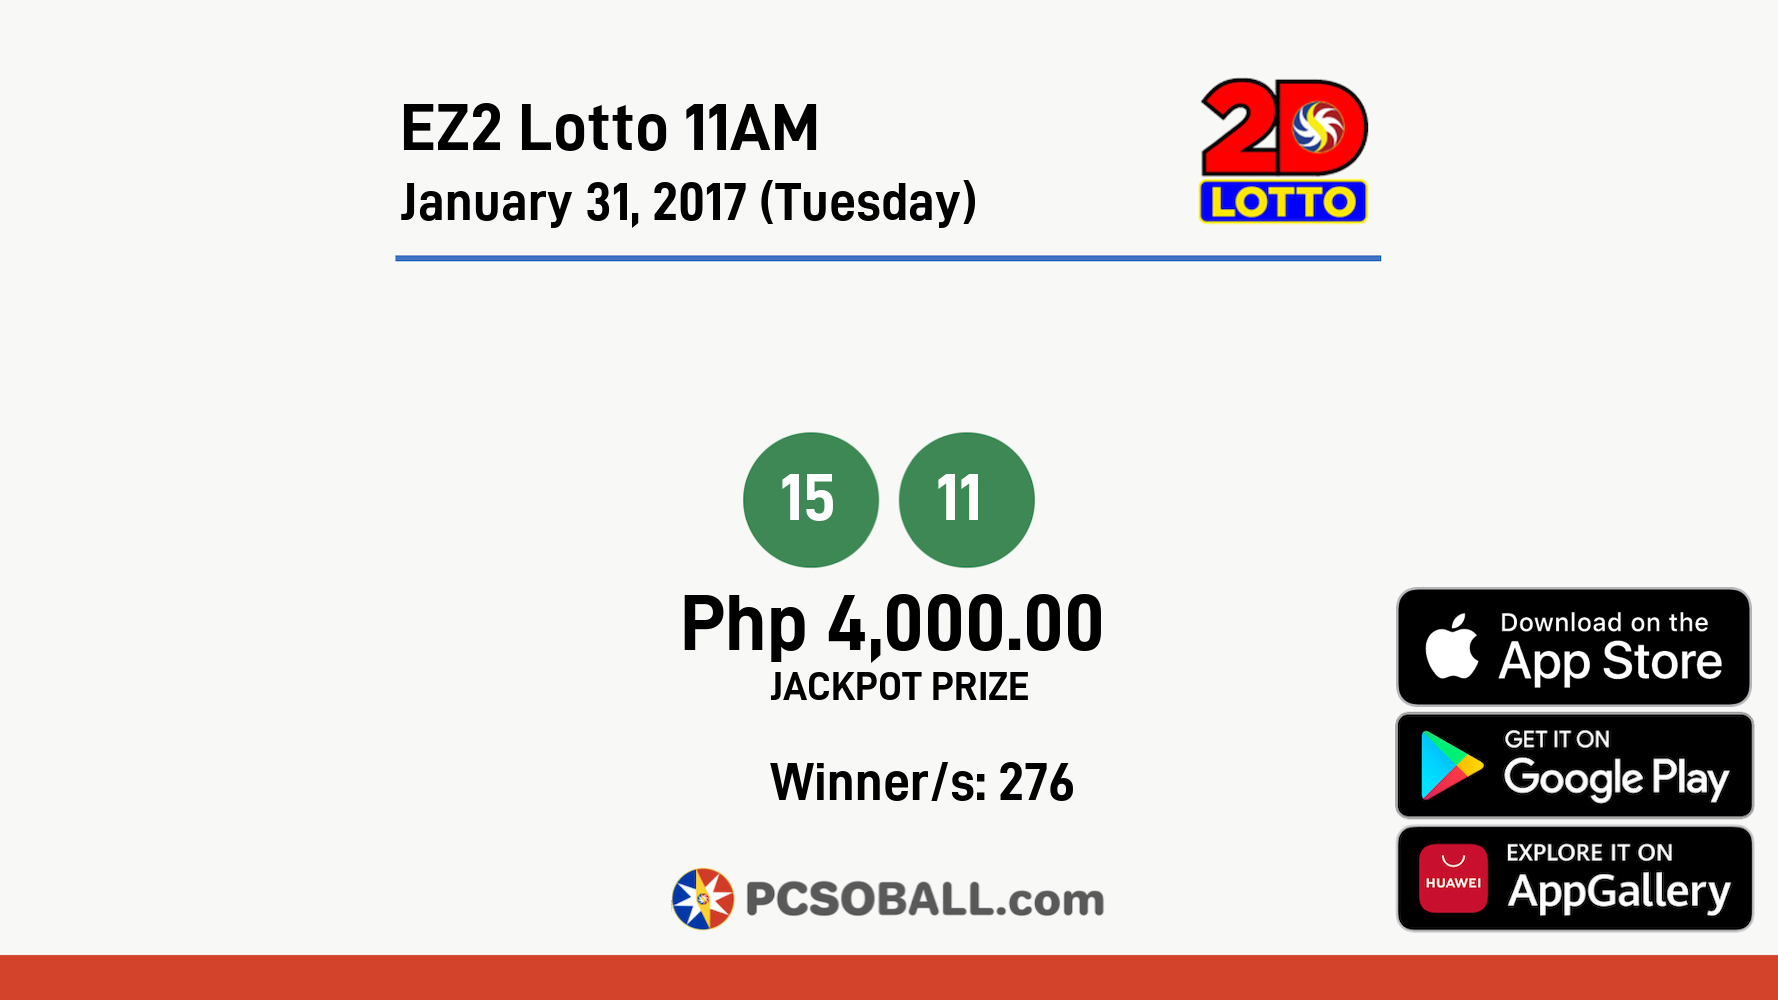 EZ2 Lotto 11AM January 31, 2017 (Tuesday) Result